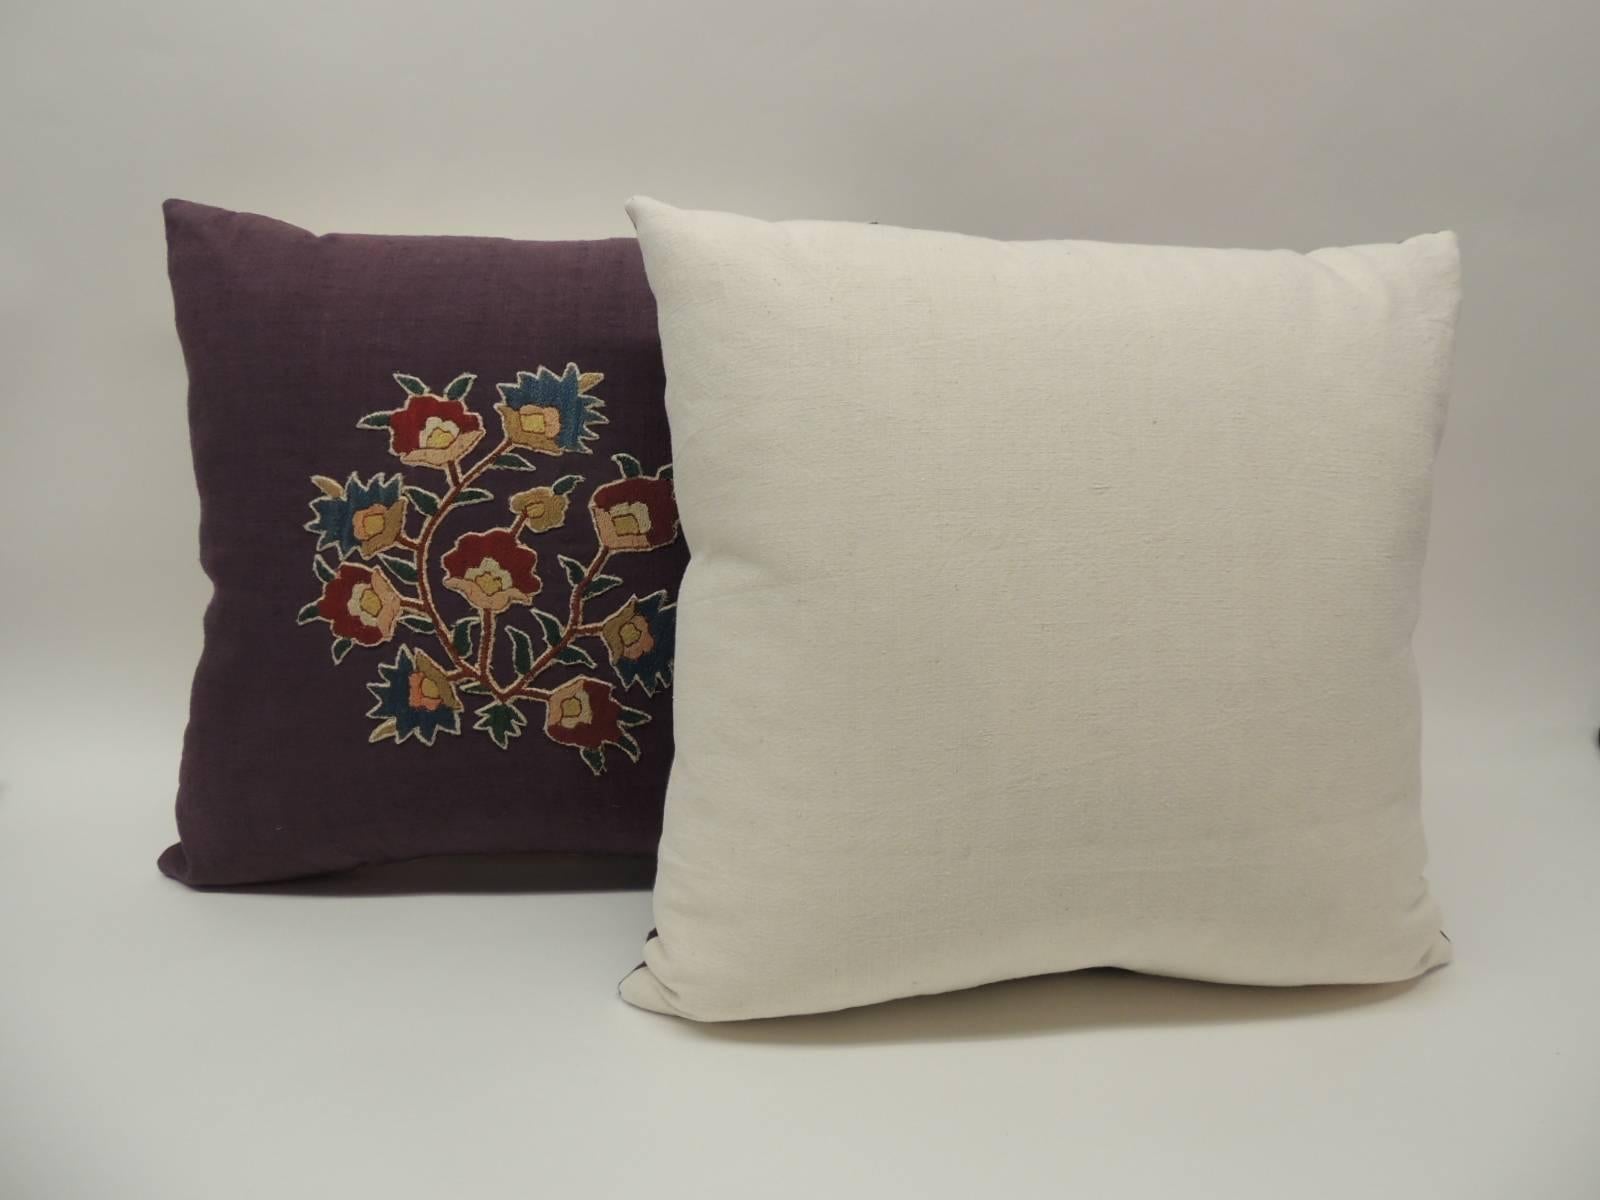 Pair of 19th century Turkish embroidery hand appliqué on purple home-spun linen decorative pillows depicting a floral motif. The hand-embroidery appliqué in shades of red, yellow, gold, blue and natural shades. The backing of these decorative